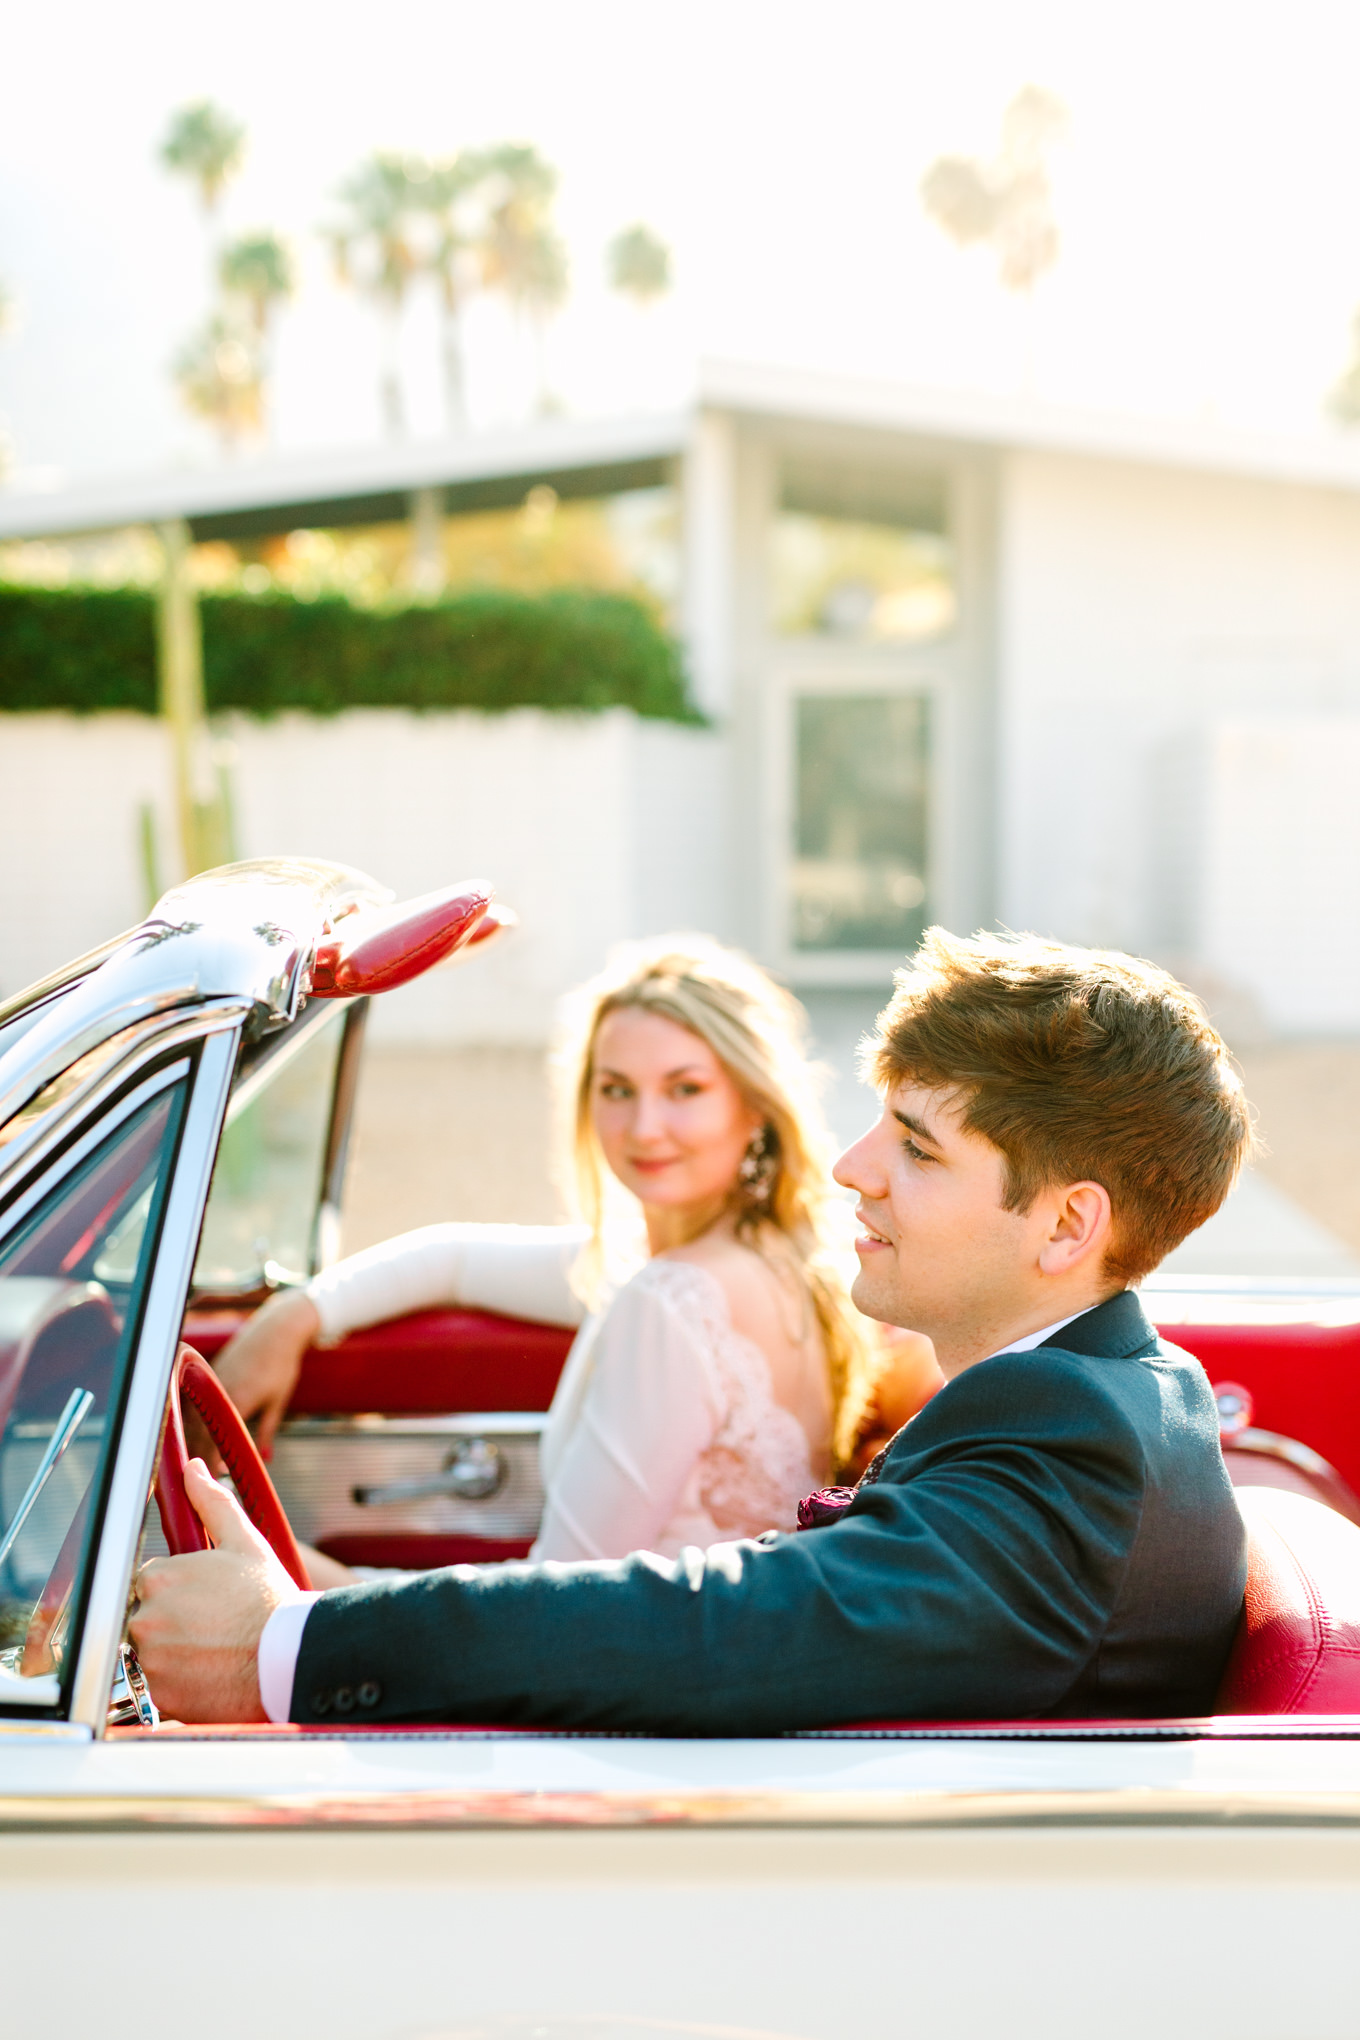 Groom driving classic Ford Thunderbird | Colorful jewel tone Palm Springs elopement | Fresh and colorful photography for fun-loving couples in Southern California | #colorfulelopement #palmspringselopement #elopementphotography #palmspringswedding Source: Mary Costa Photography | Los Angeles